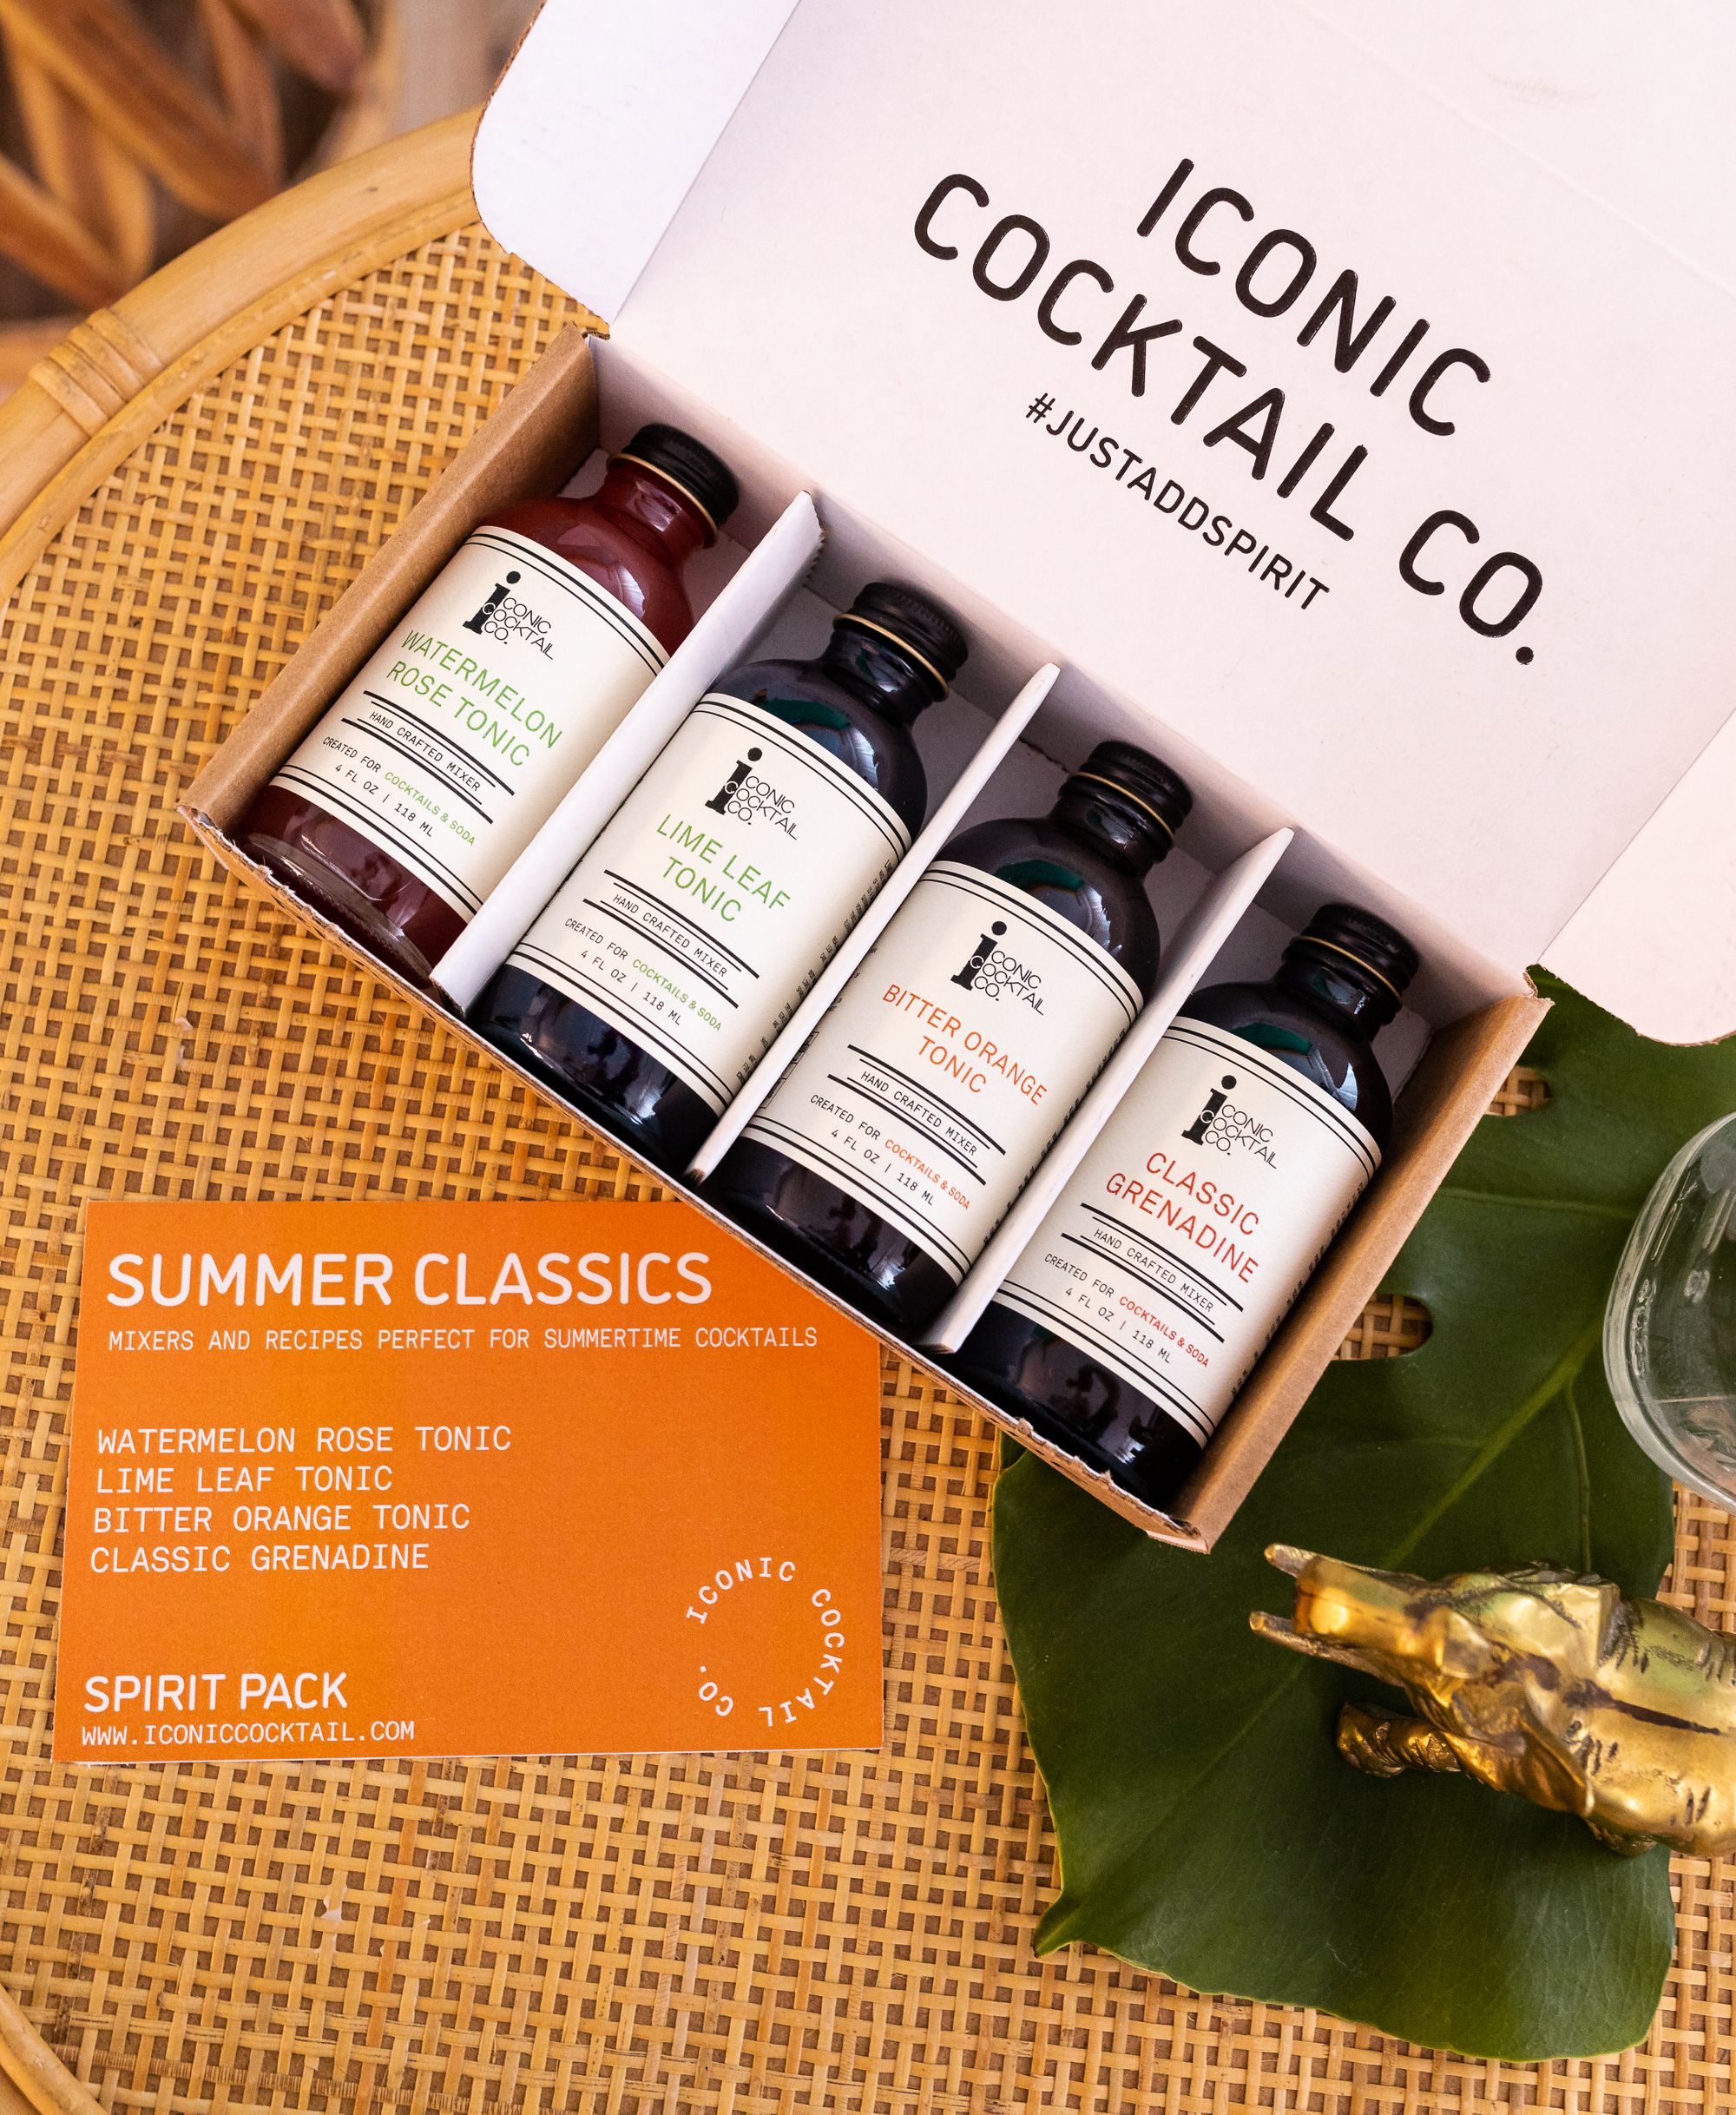 #JustAddSpirit to Custom Packaging with Loud Snaps Creative and Iconic Cocktail Co.